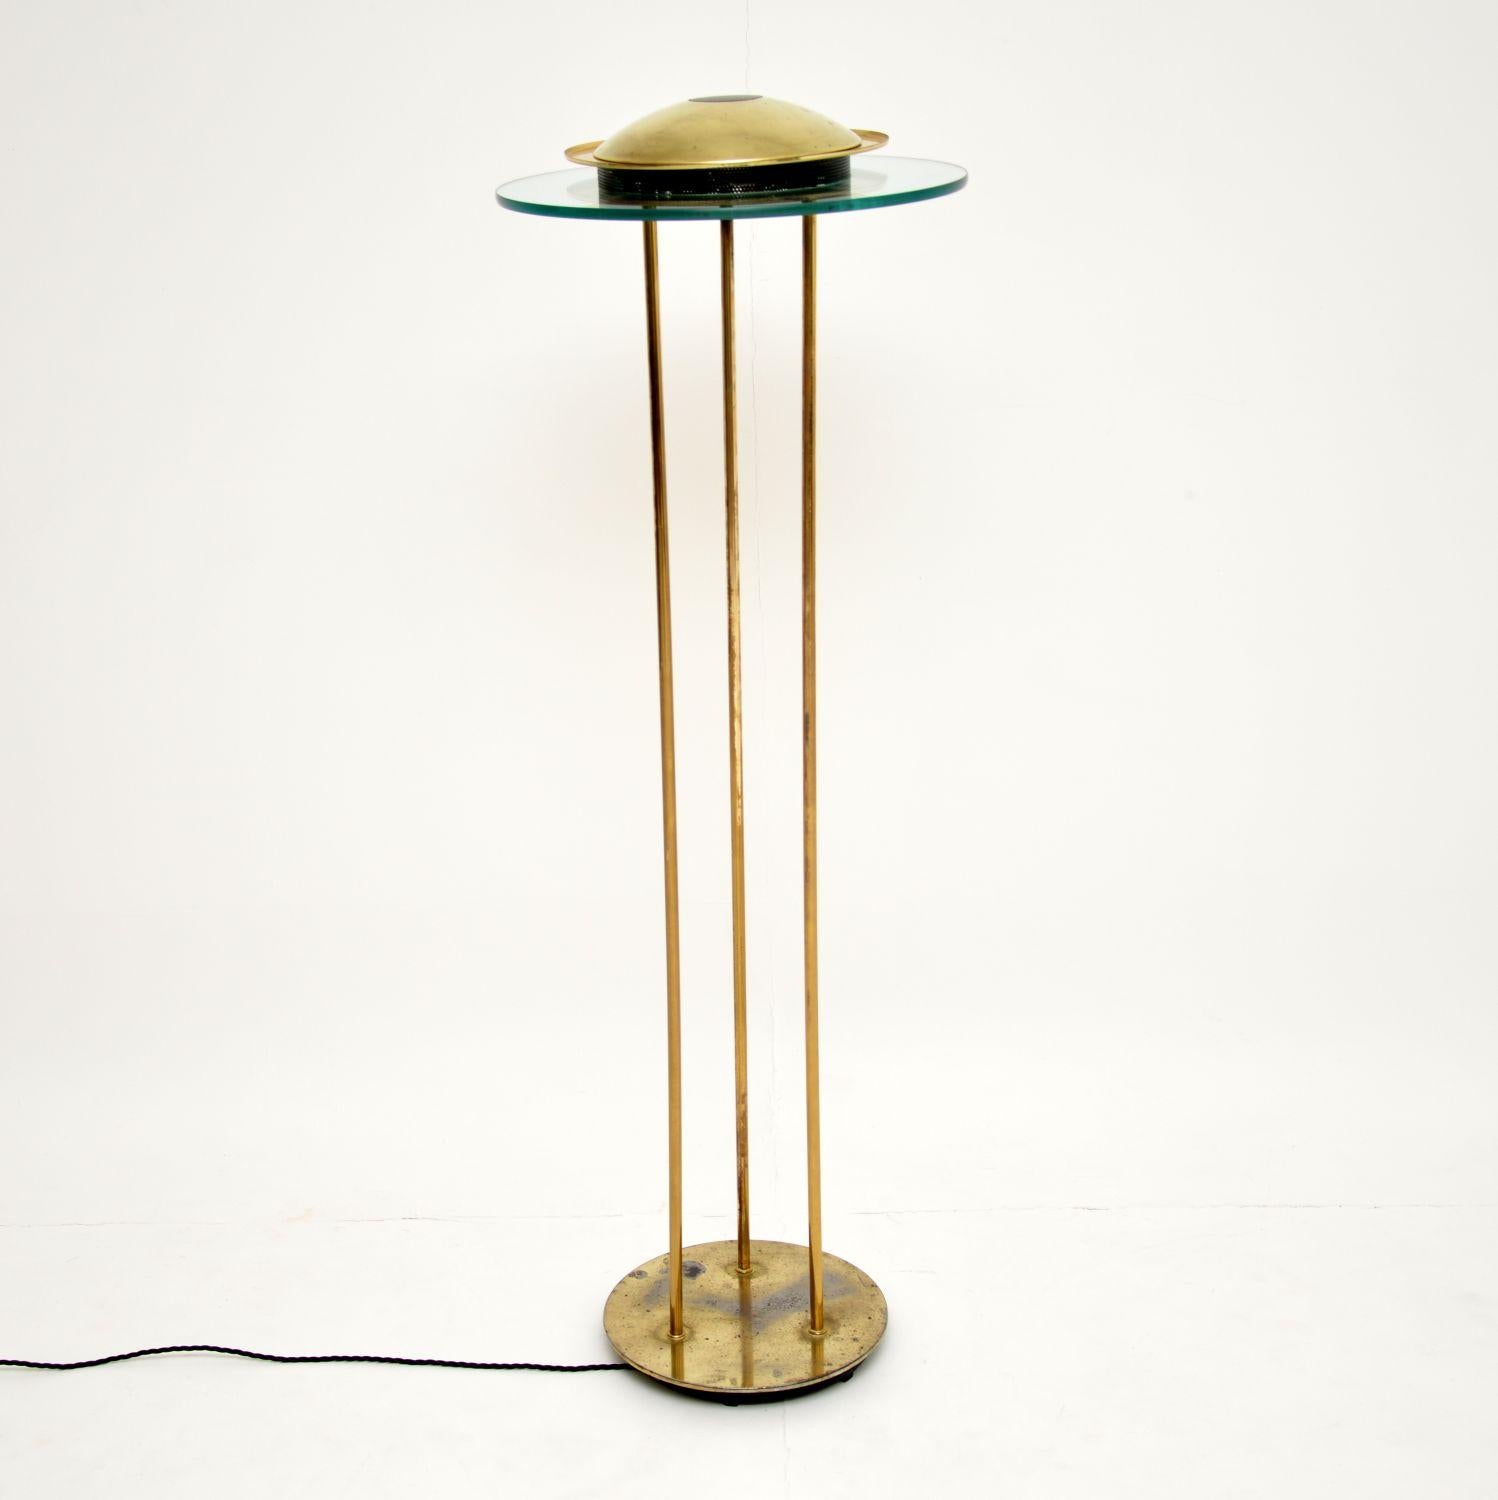 A stunning and rare vintage brass & glass floor lamp by Robert Sonneman for George Kovacs.

This was made in the USA in the 1970-80’s, it is a beautiful design. It is a lovely size, and is in good overall condition for its age, with some surface